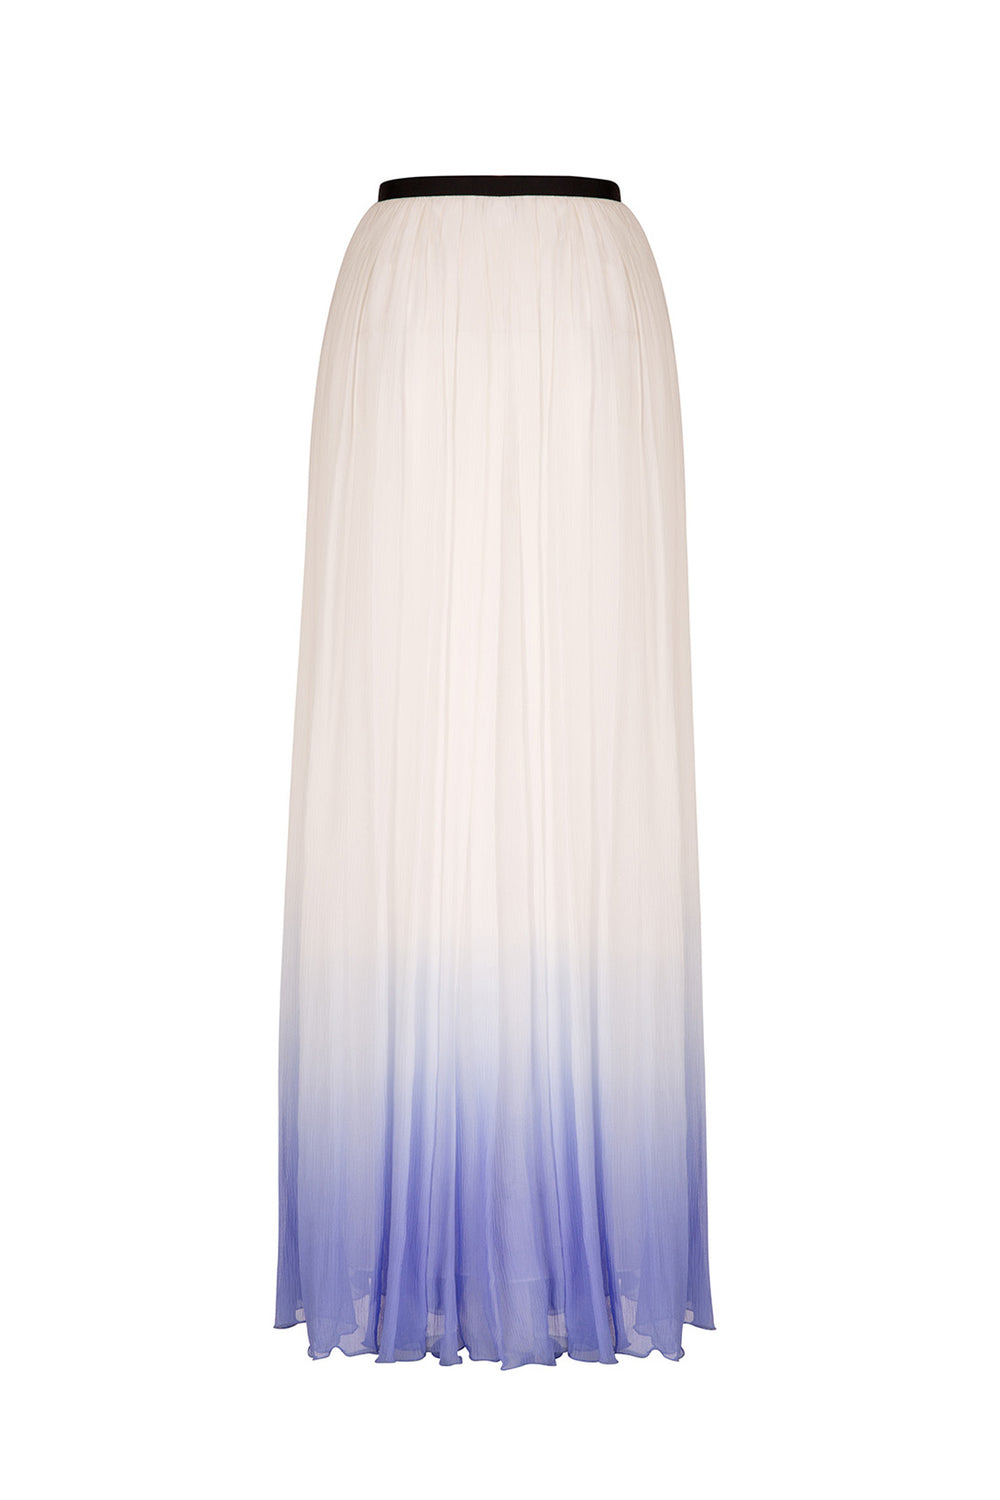 Load image into Gallery viewer, Meiko Dip Dyed Skirt